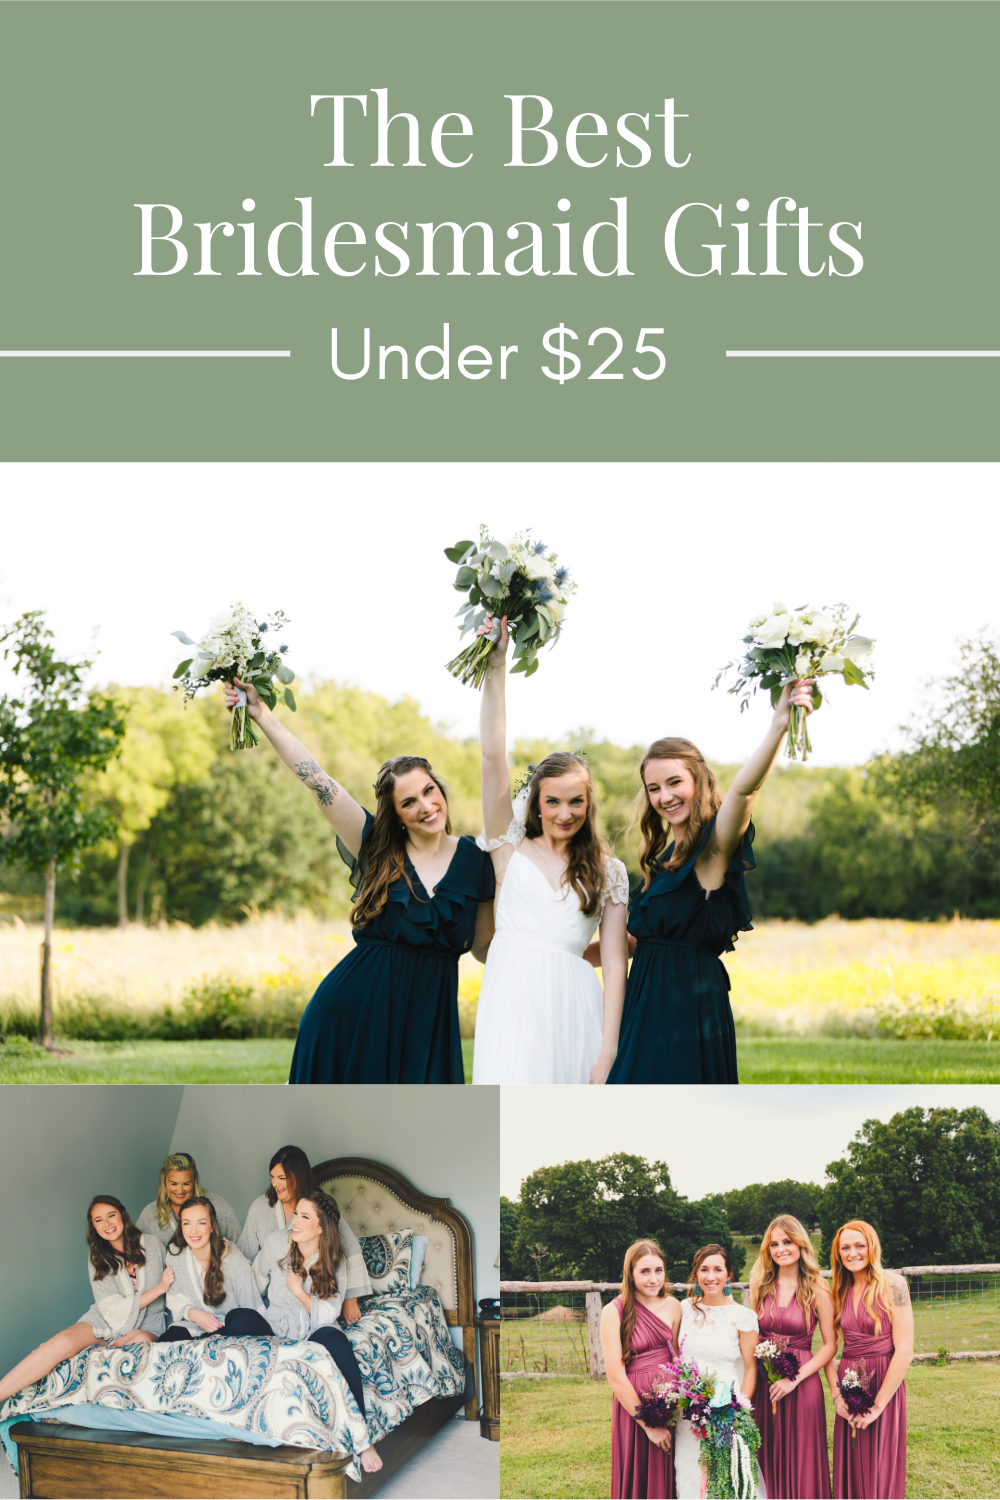 best bridesmaid gifts, maid of honor, bridesmaids, bridal party, wedding party, bridal party gifts, wedding party gifts